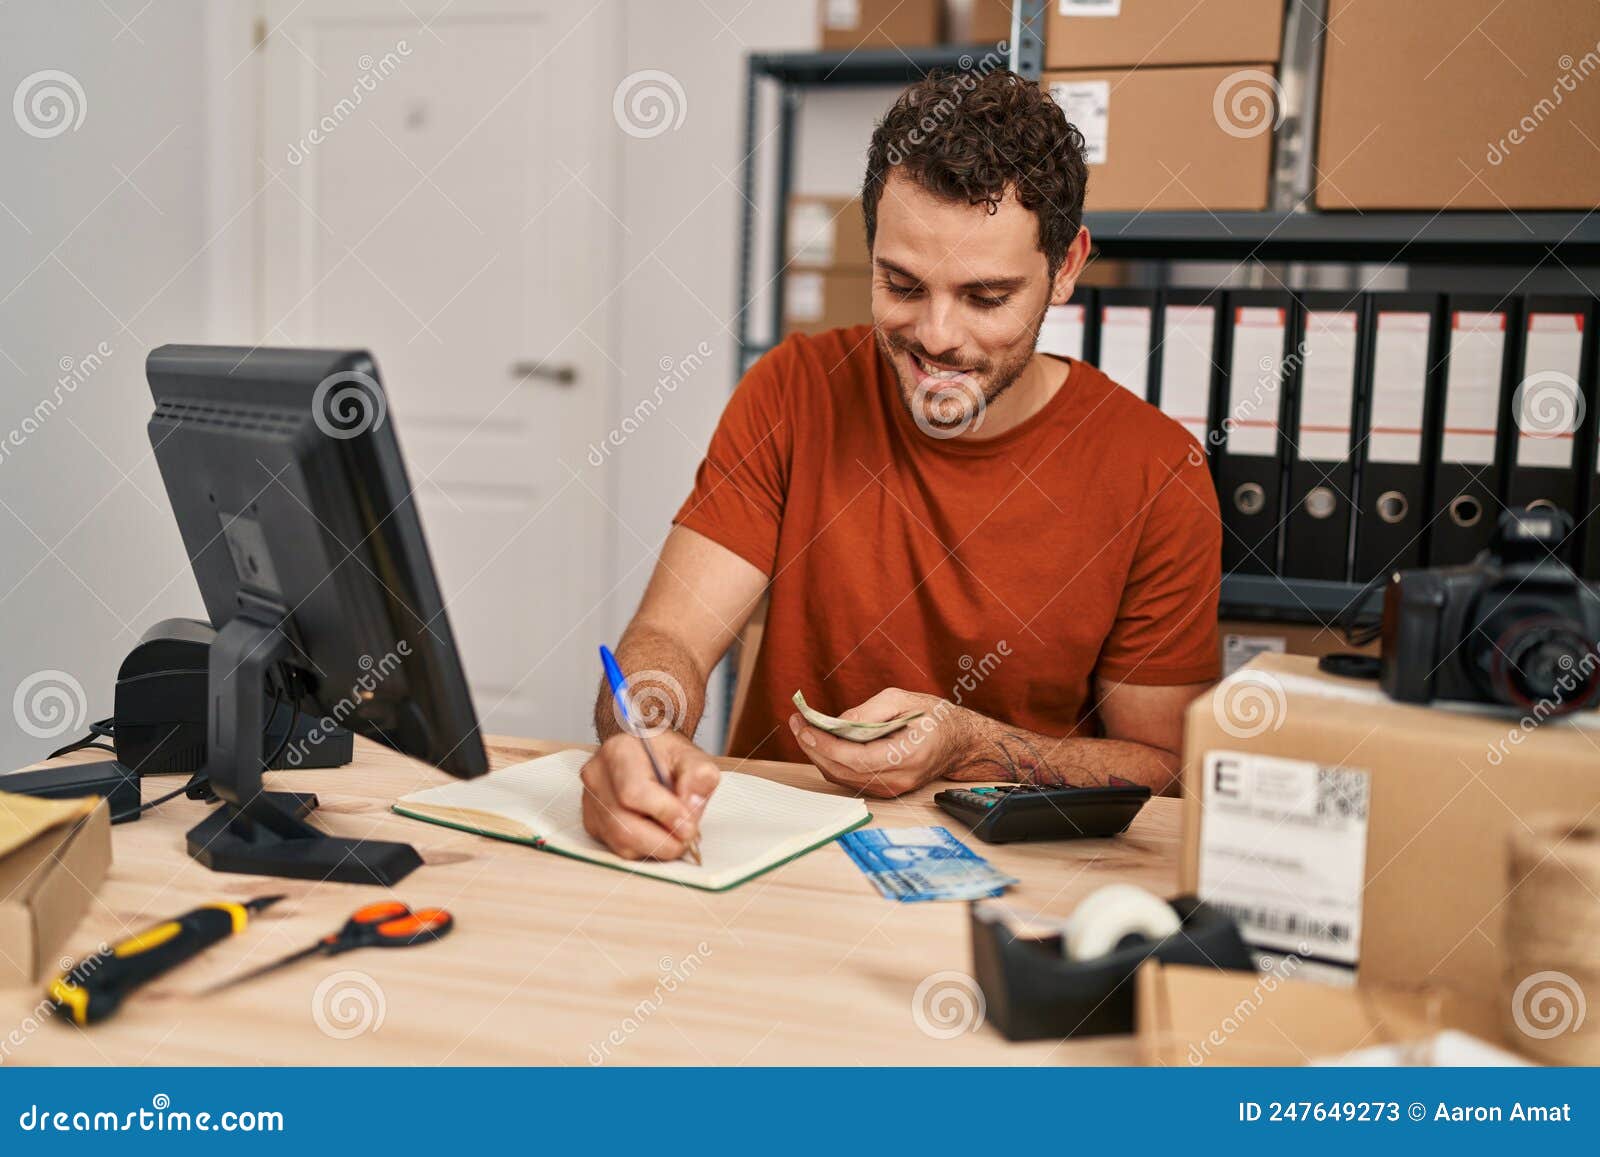 Young Hispanic Man Ecommerce Business Worker Writing on Notebook Holding  Chile Pesos Banknotes at Office Stock Image - Image of banknotes, handsome:  247649273